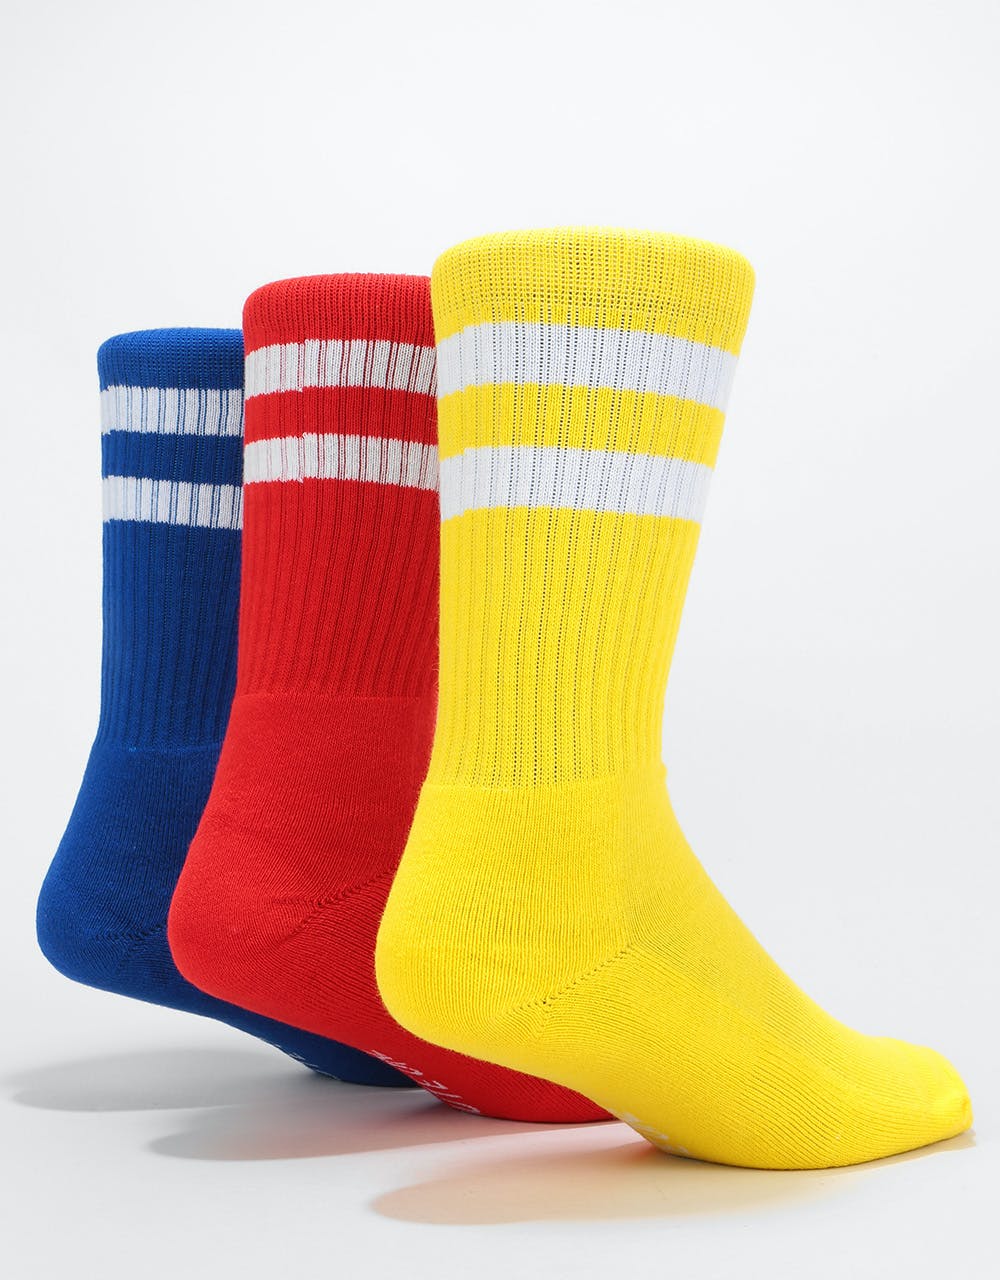 Route One Classic Crew Socks 3 Pack - Primary/White